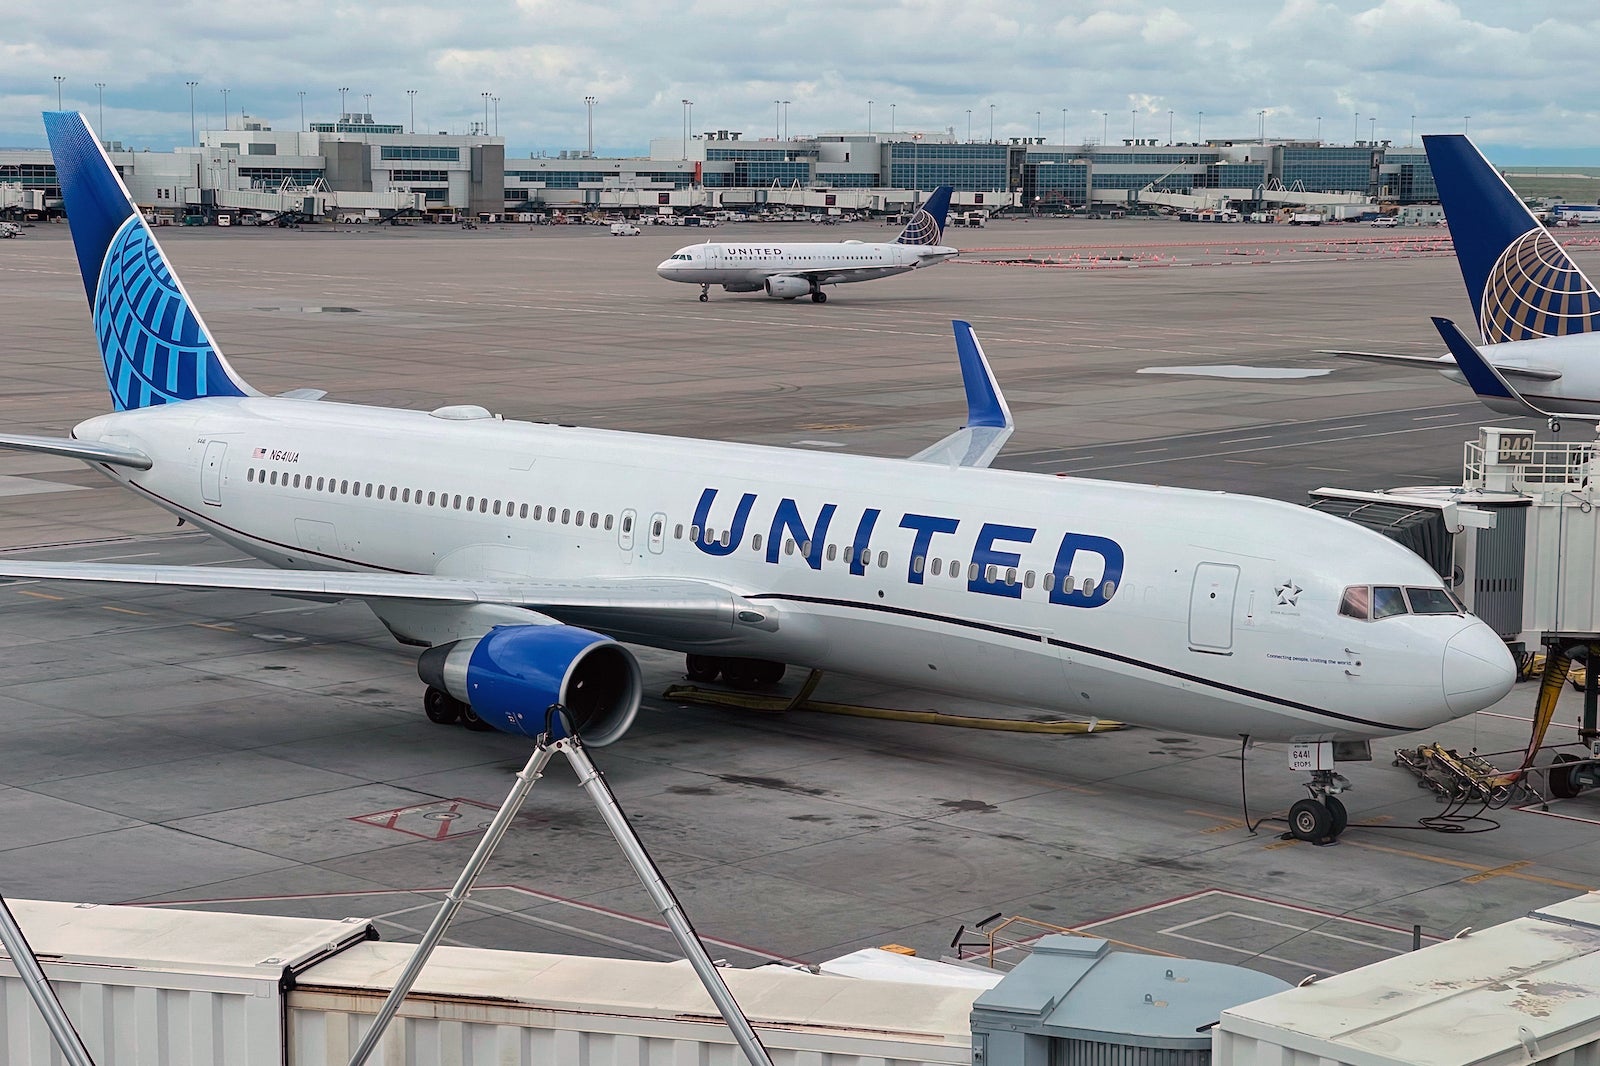 United Boeing 767 parked at a gate